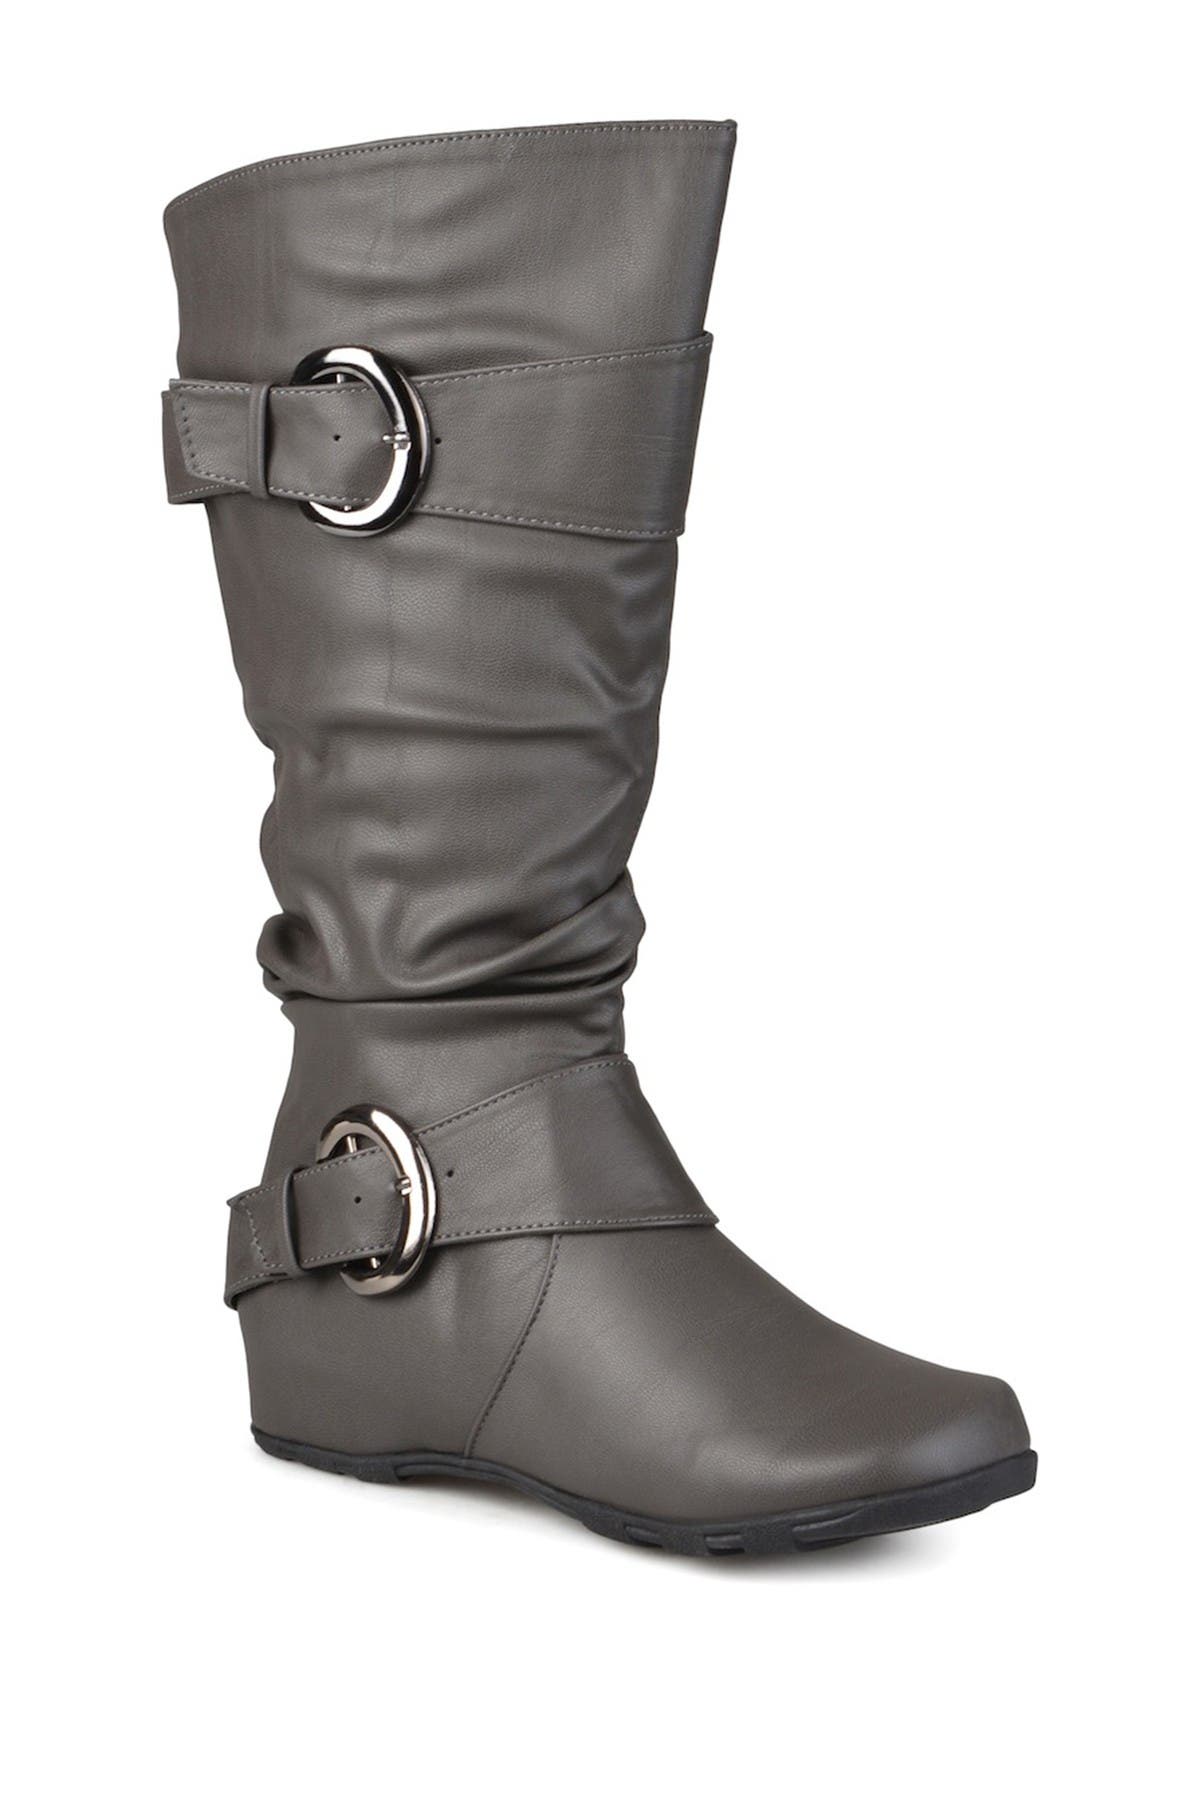 extra wide mid calf boots